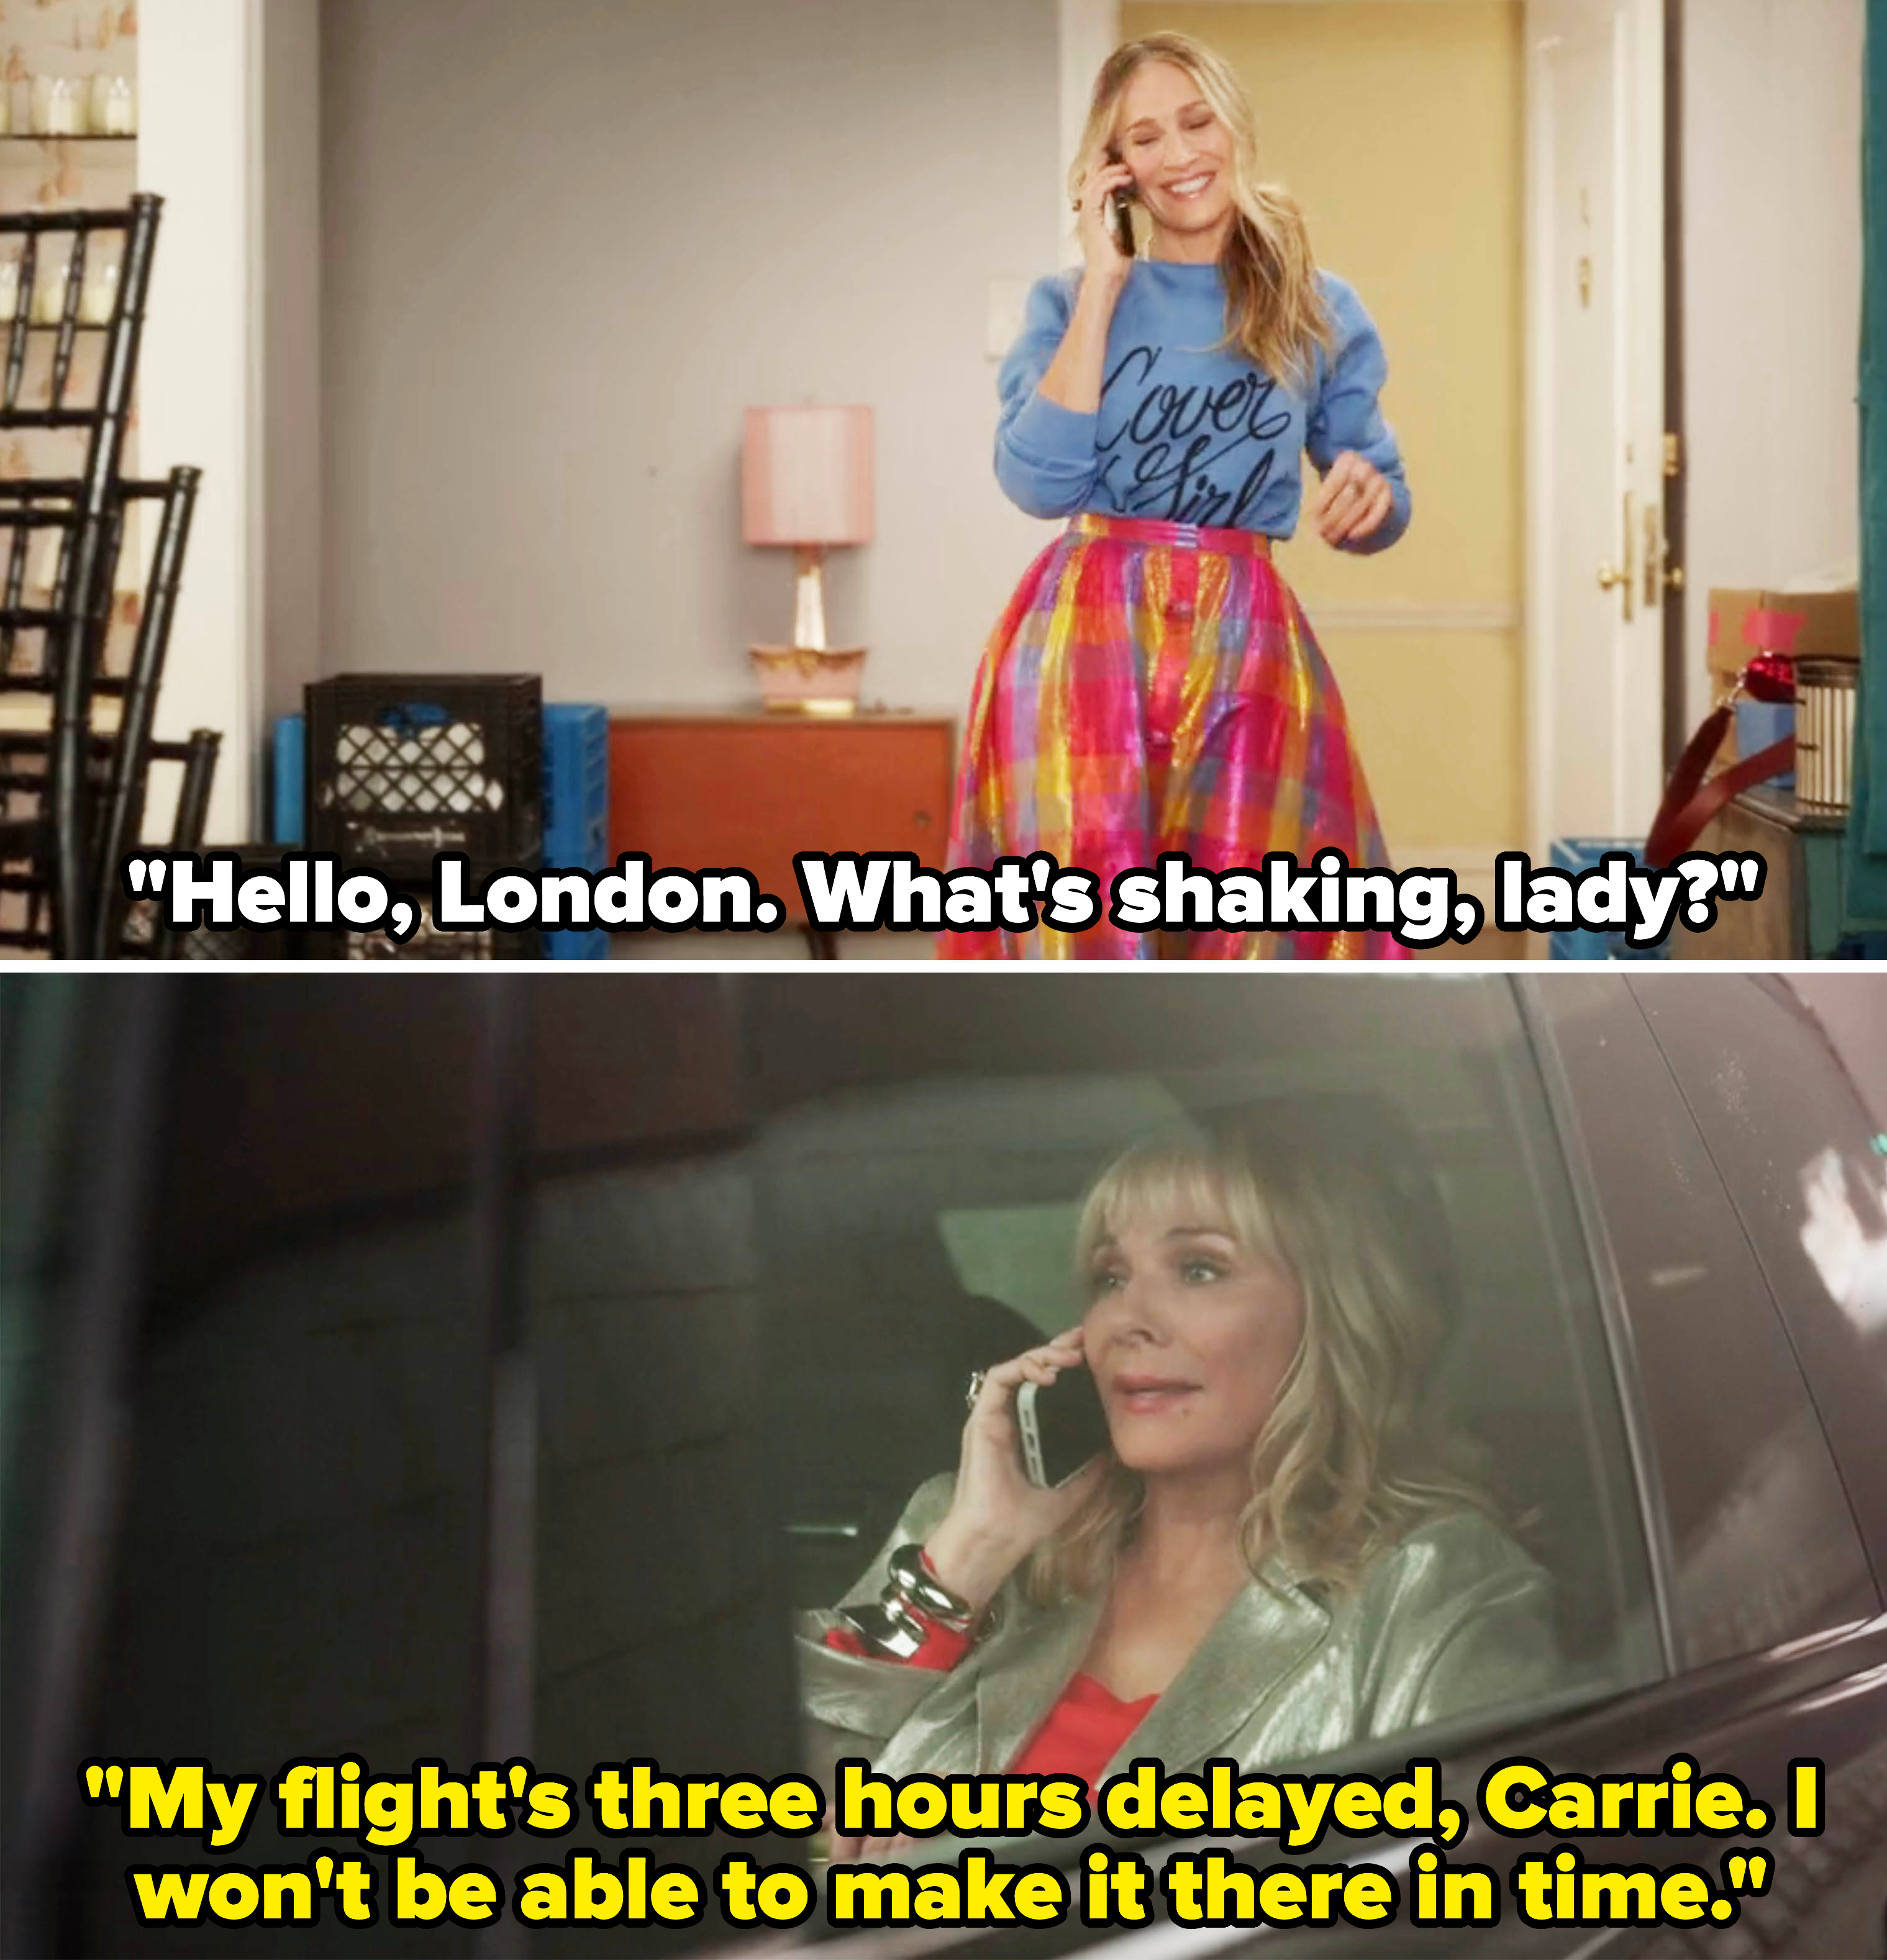 Carrie on the phone: &quot;Hello, London; what&#x27;s shaking, lady?&quot; Sam: &quot;My flight&#x27;s three hours delayed, Carrie; I won&#x27;t be able to make it there in time&quot;